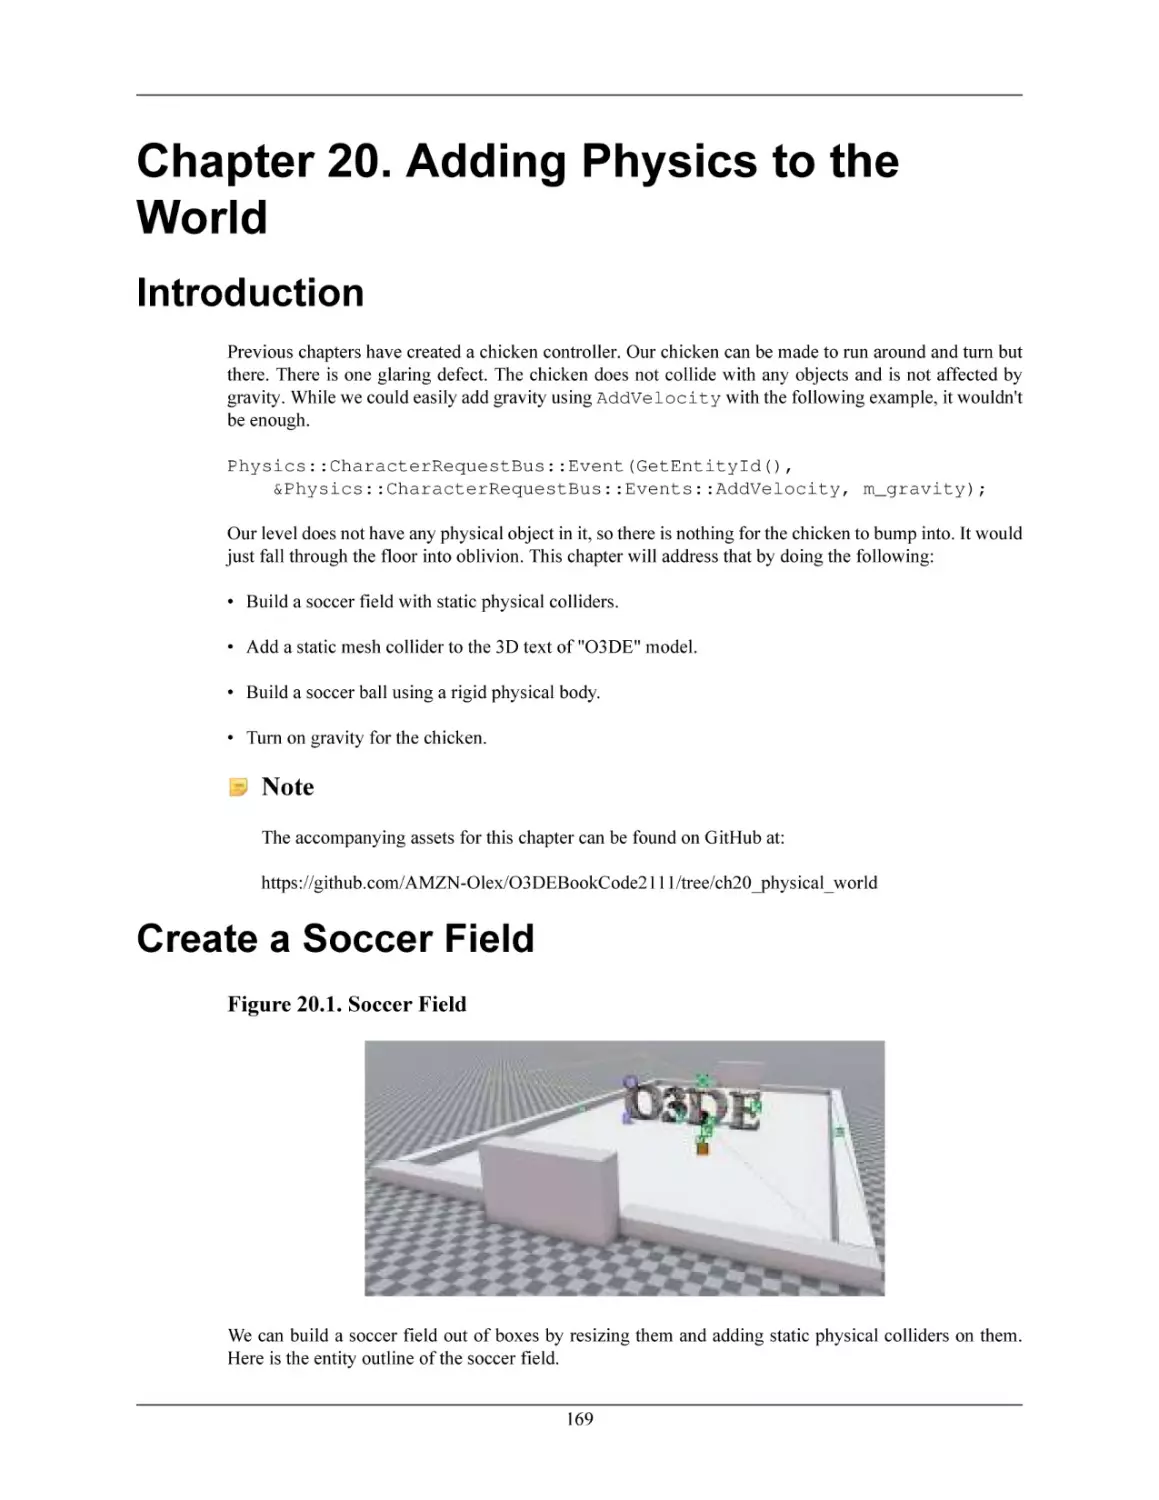 Chapter 20. Adding Physics to the World
Introduction
Create a Soccer Field